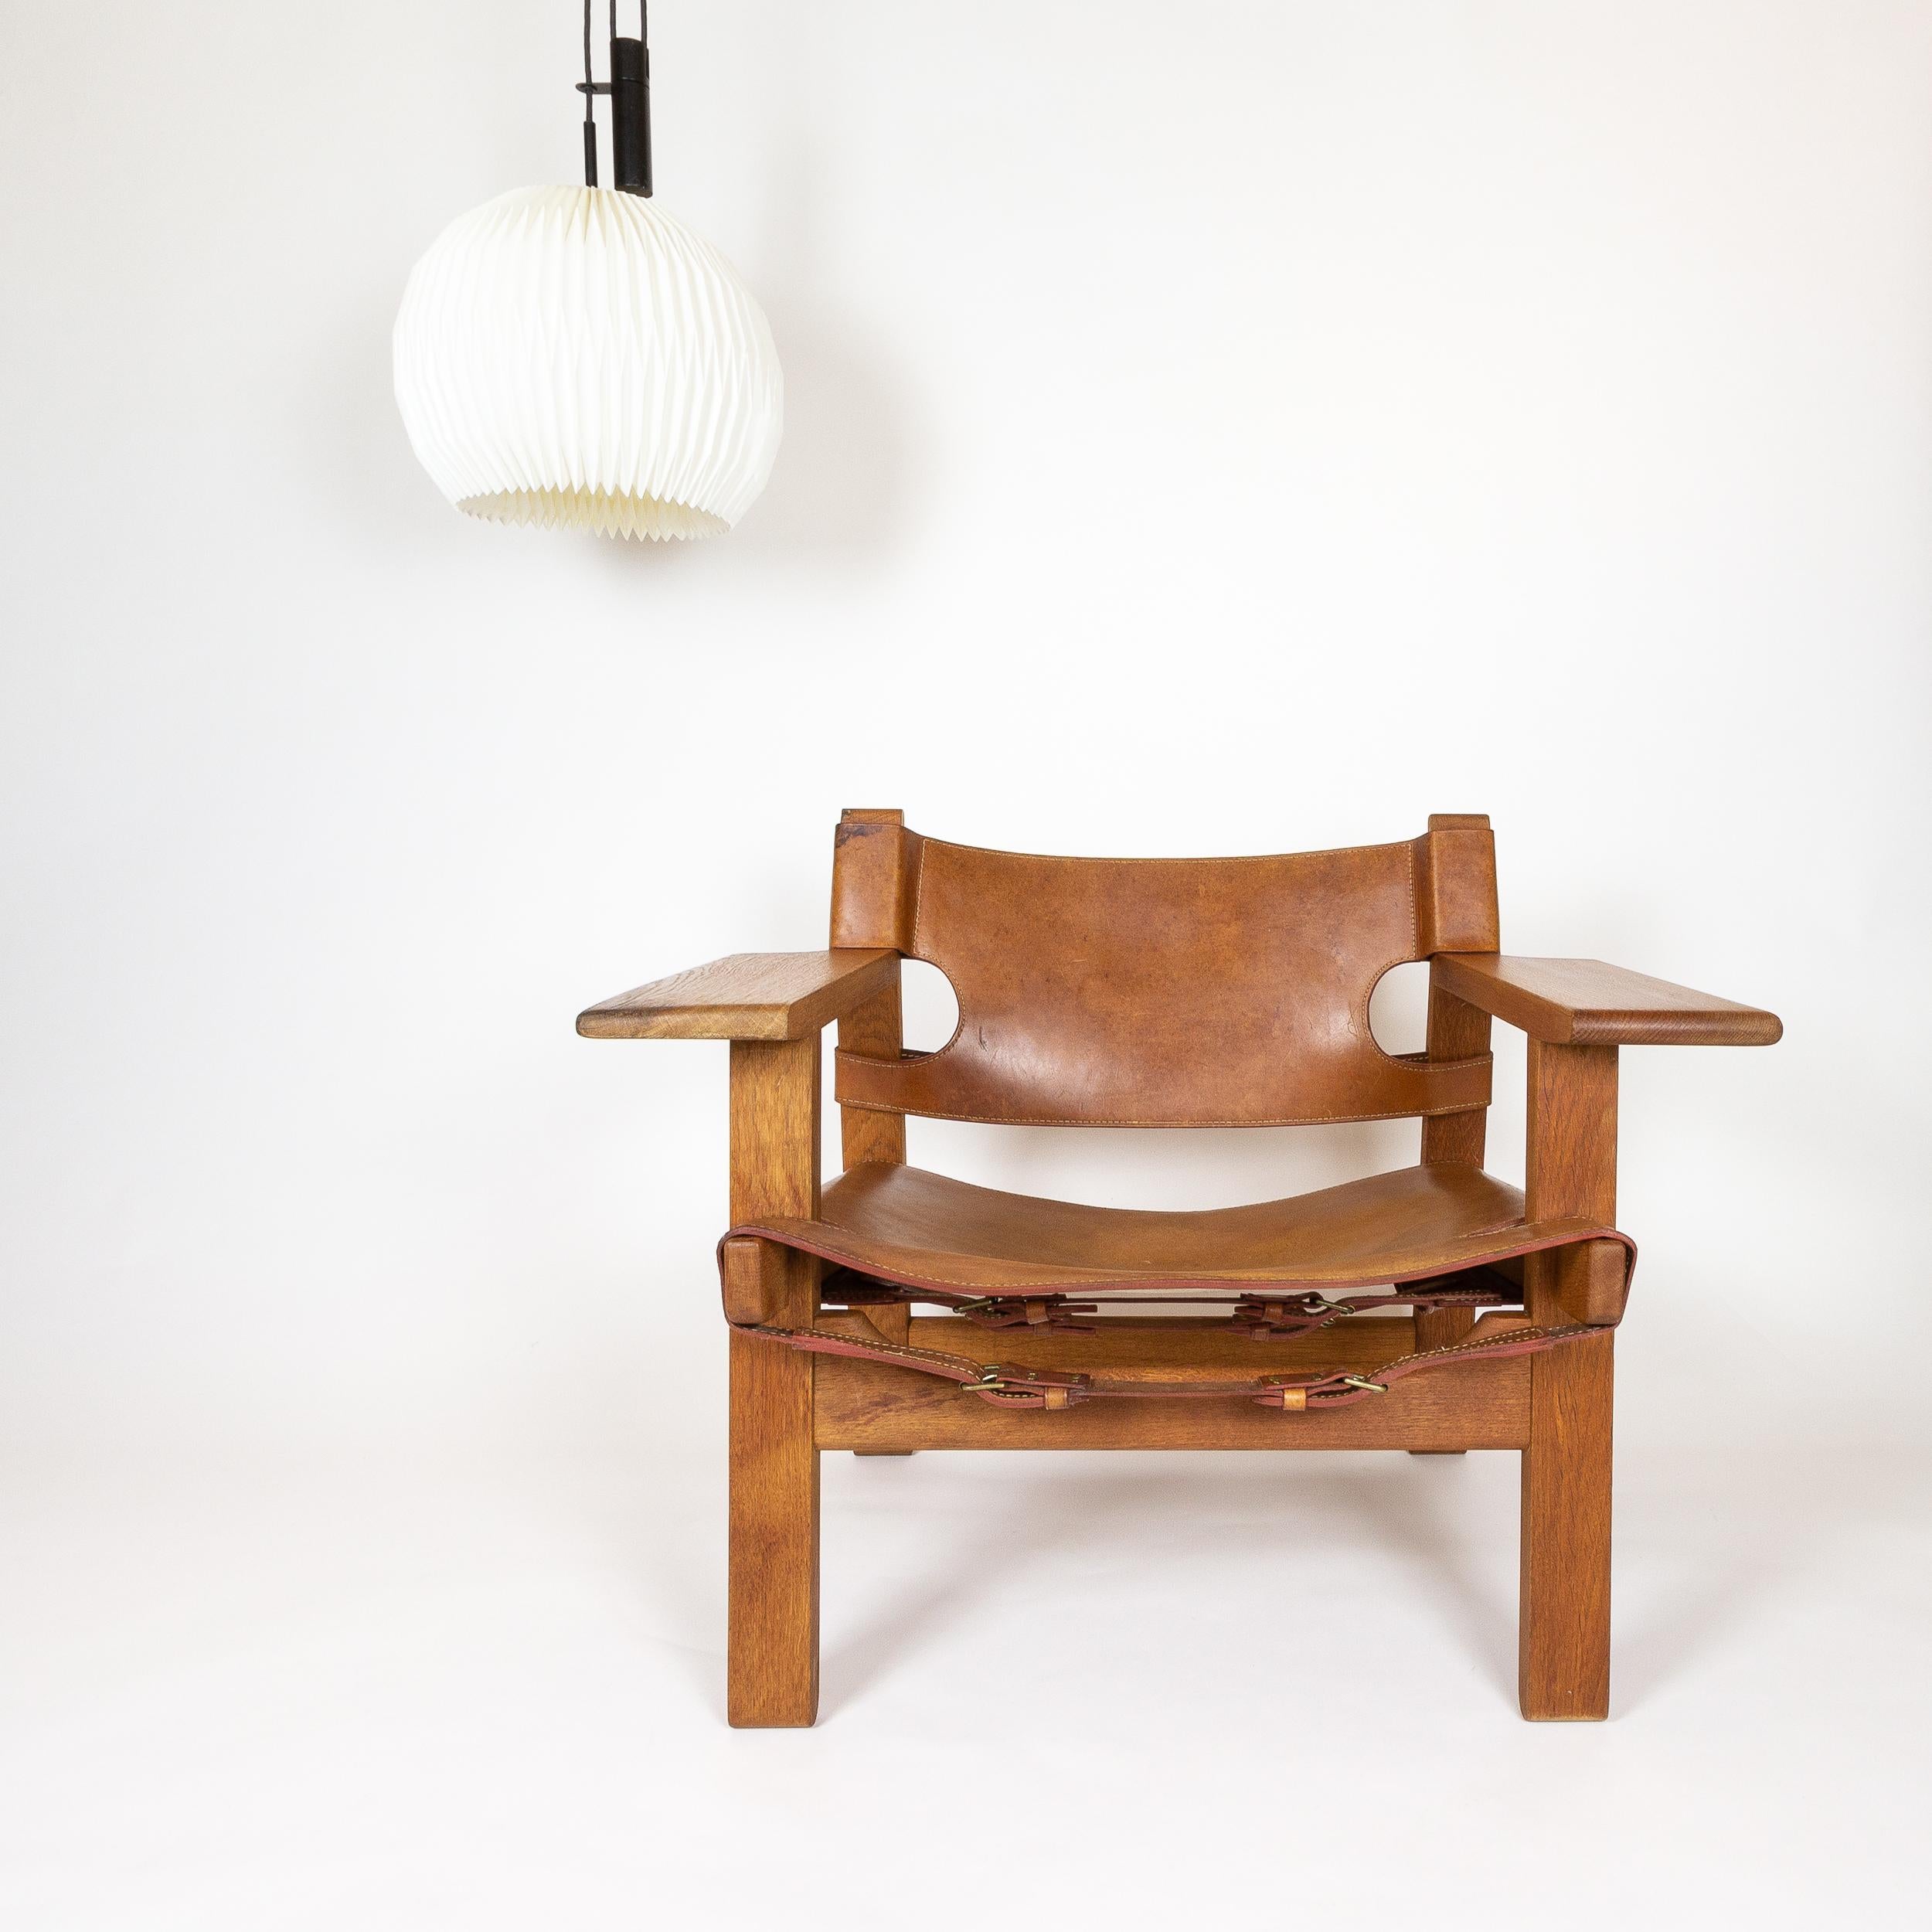 A fine example of Børge Mogensen's iconic Spanish chair on solid oak and cognac leather, designed in 1958. Excellent wear and patina. Fredericia, Denmark, 1960s. Sourced from Odense, Denmark, 35 miles from where it was made.